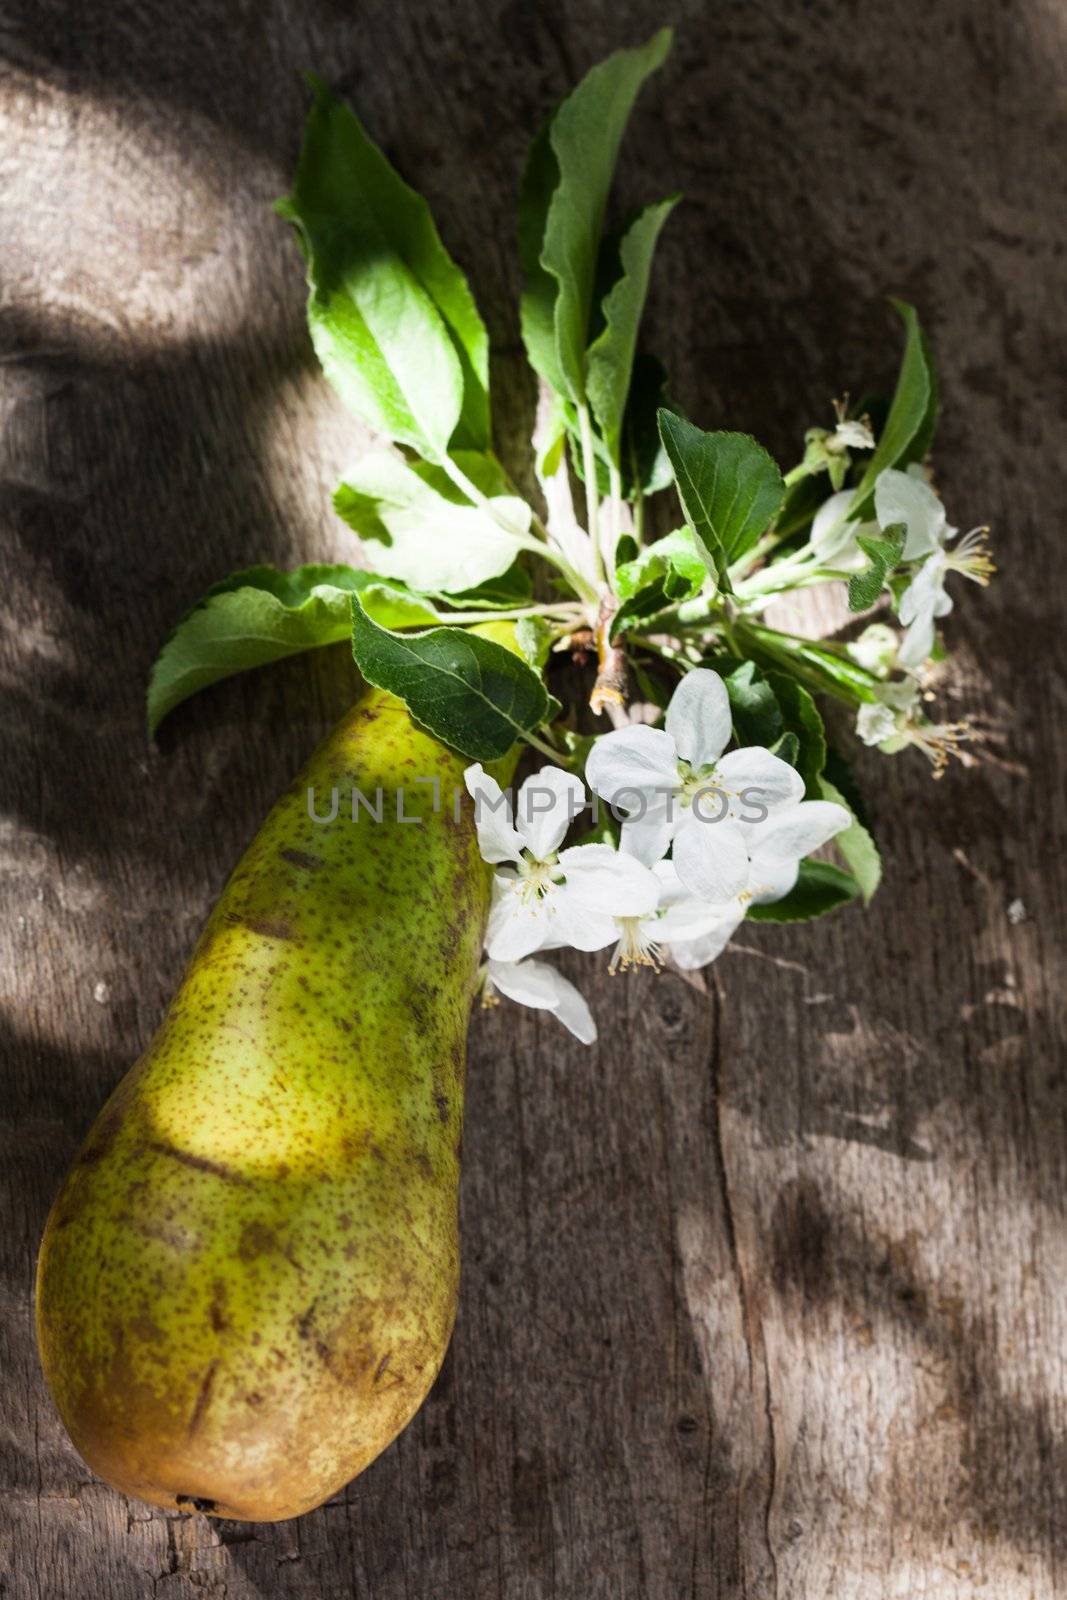 Pears and blossom on the wooden background under tree in orchard